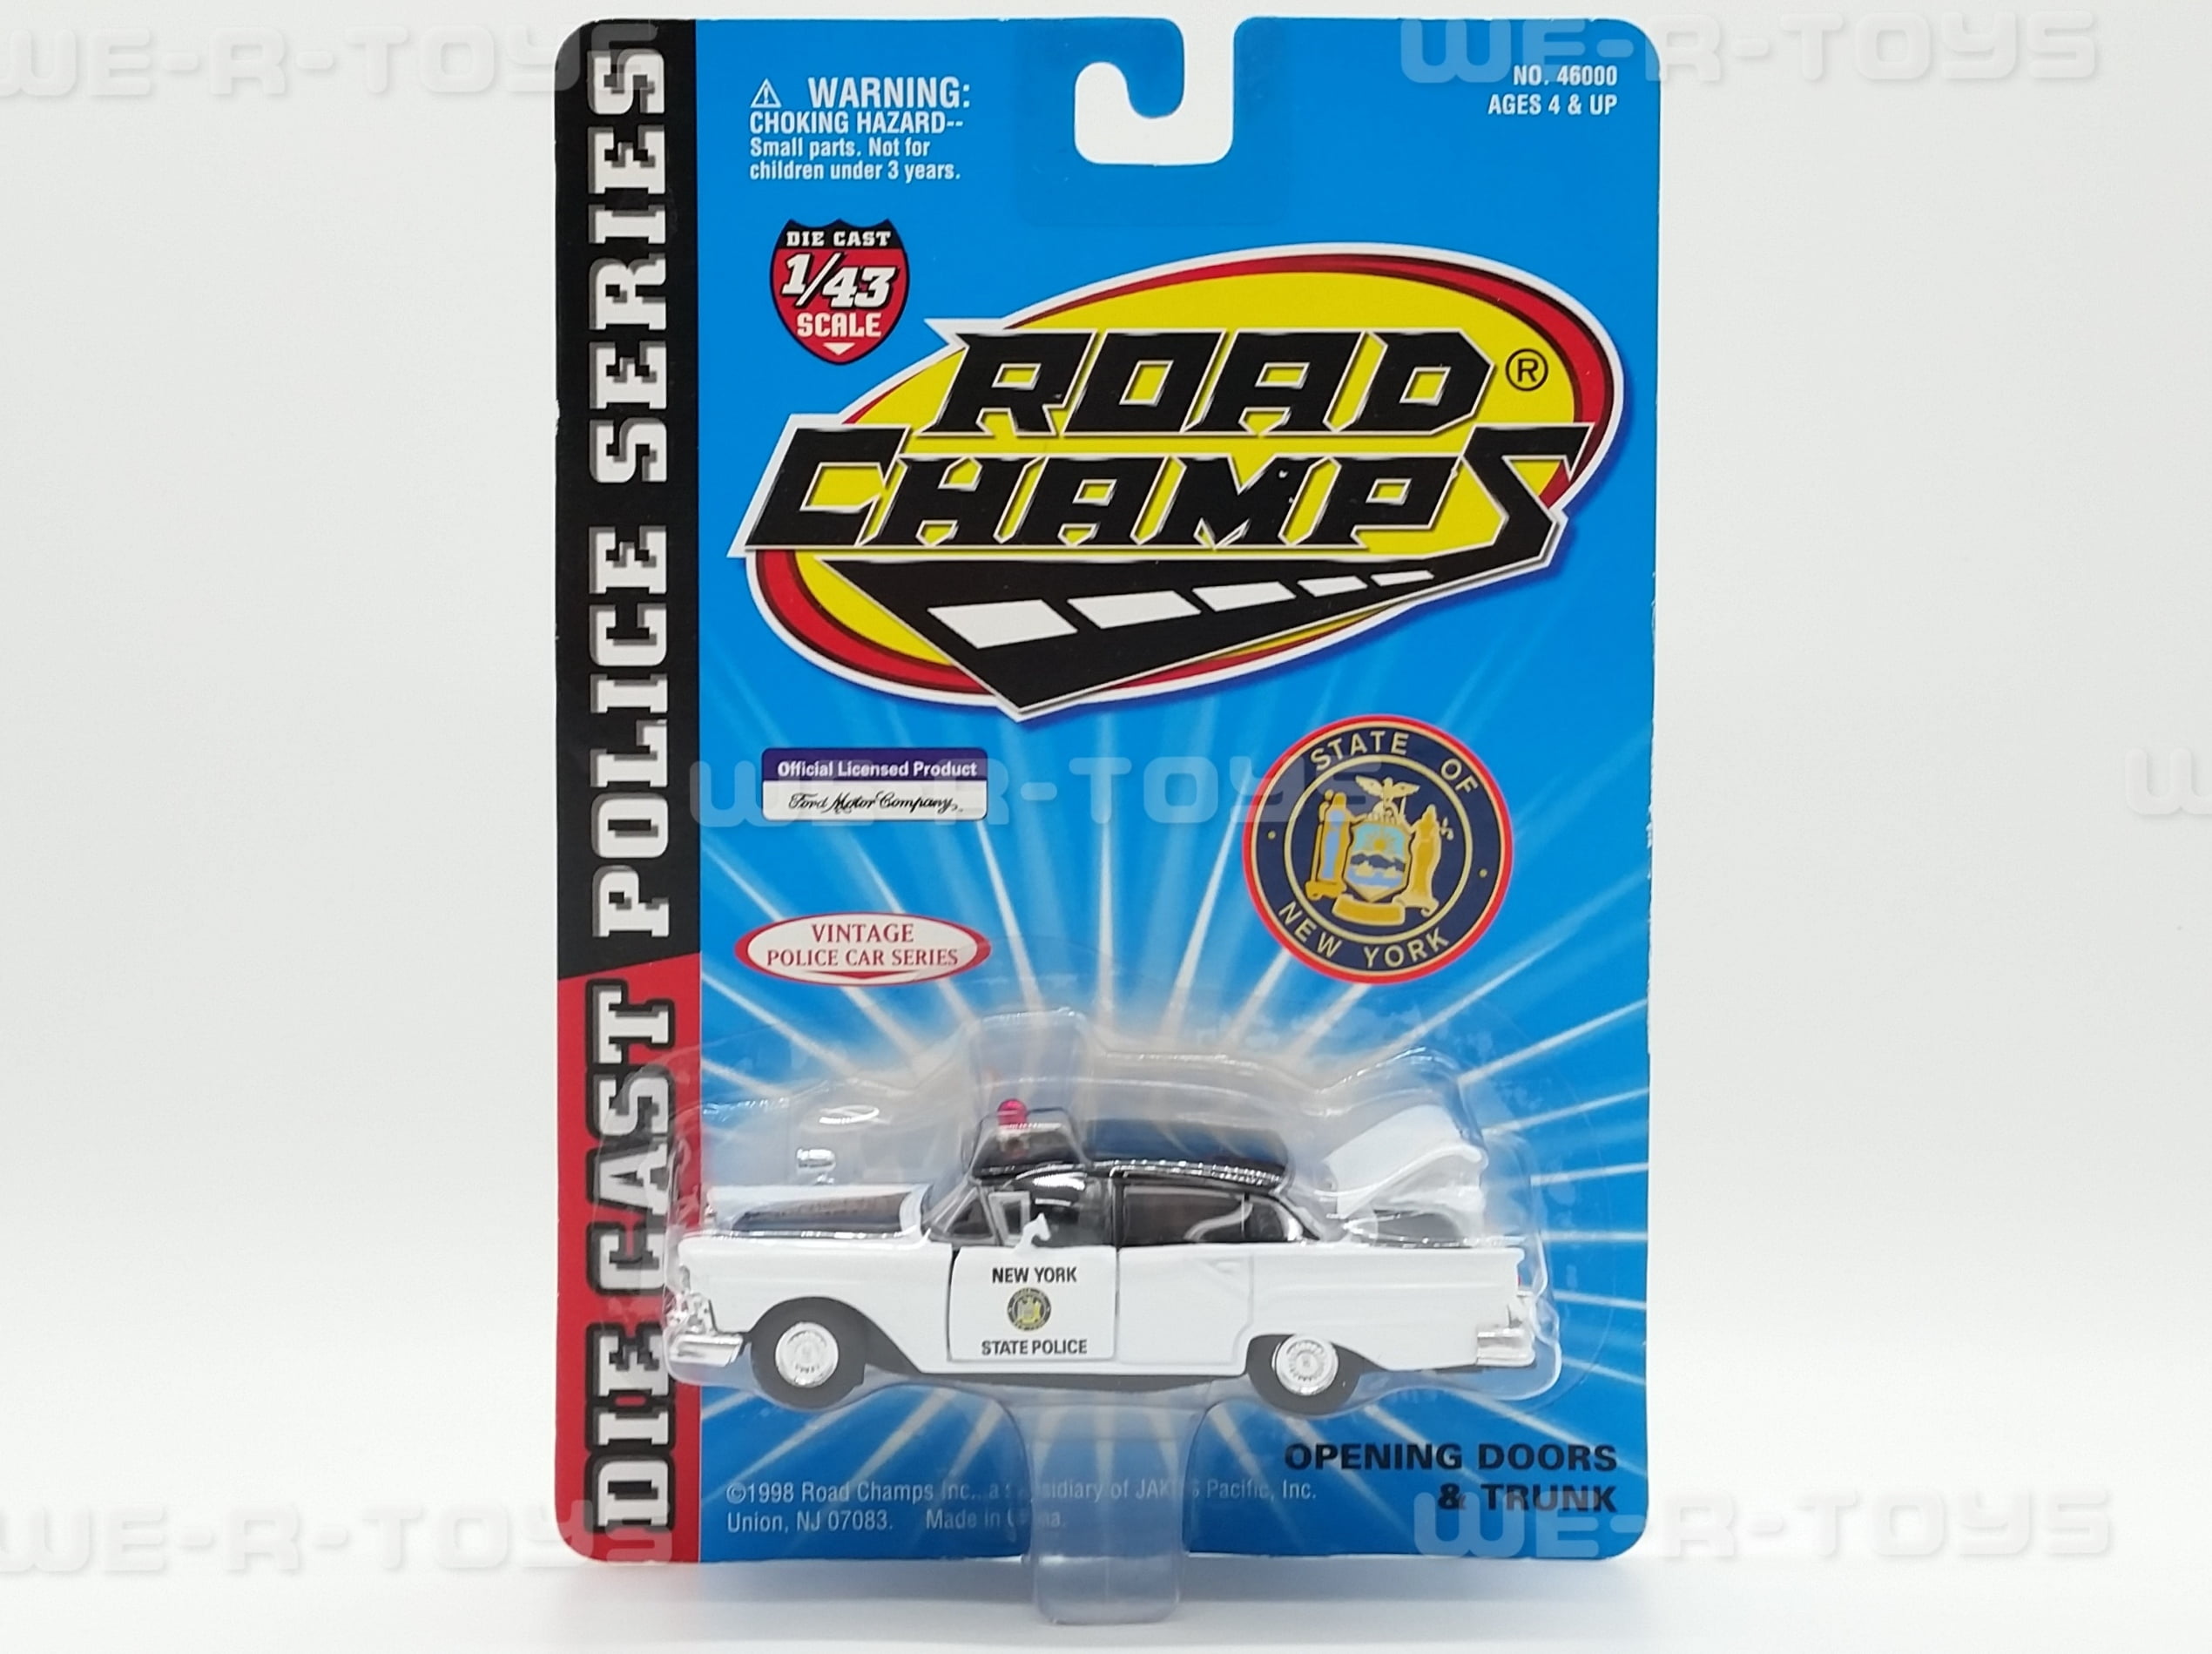 Road Champs 1/43rd scale Toys R Us Geoffrey State Police diecast car LOOSE 98 